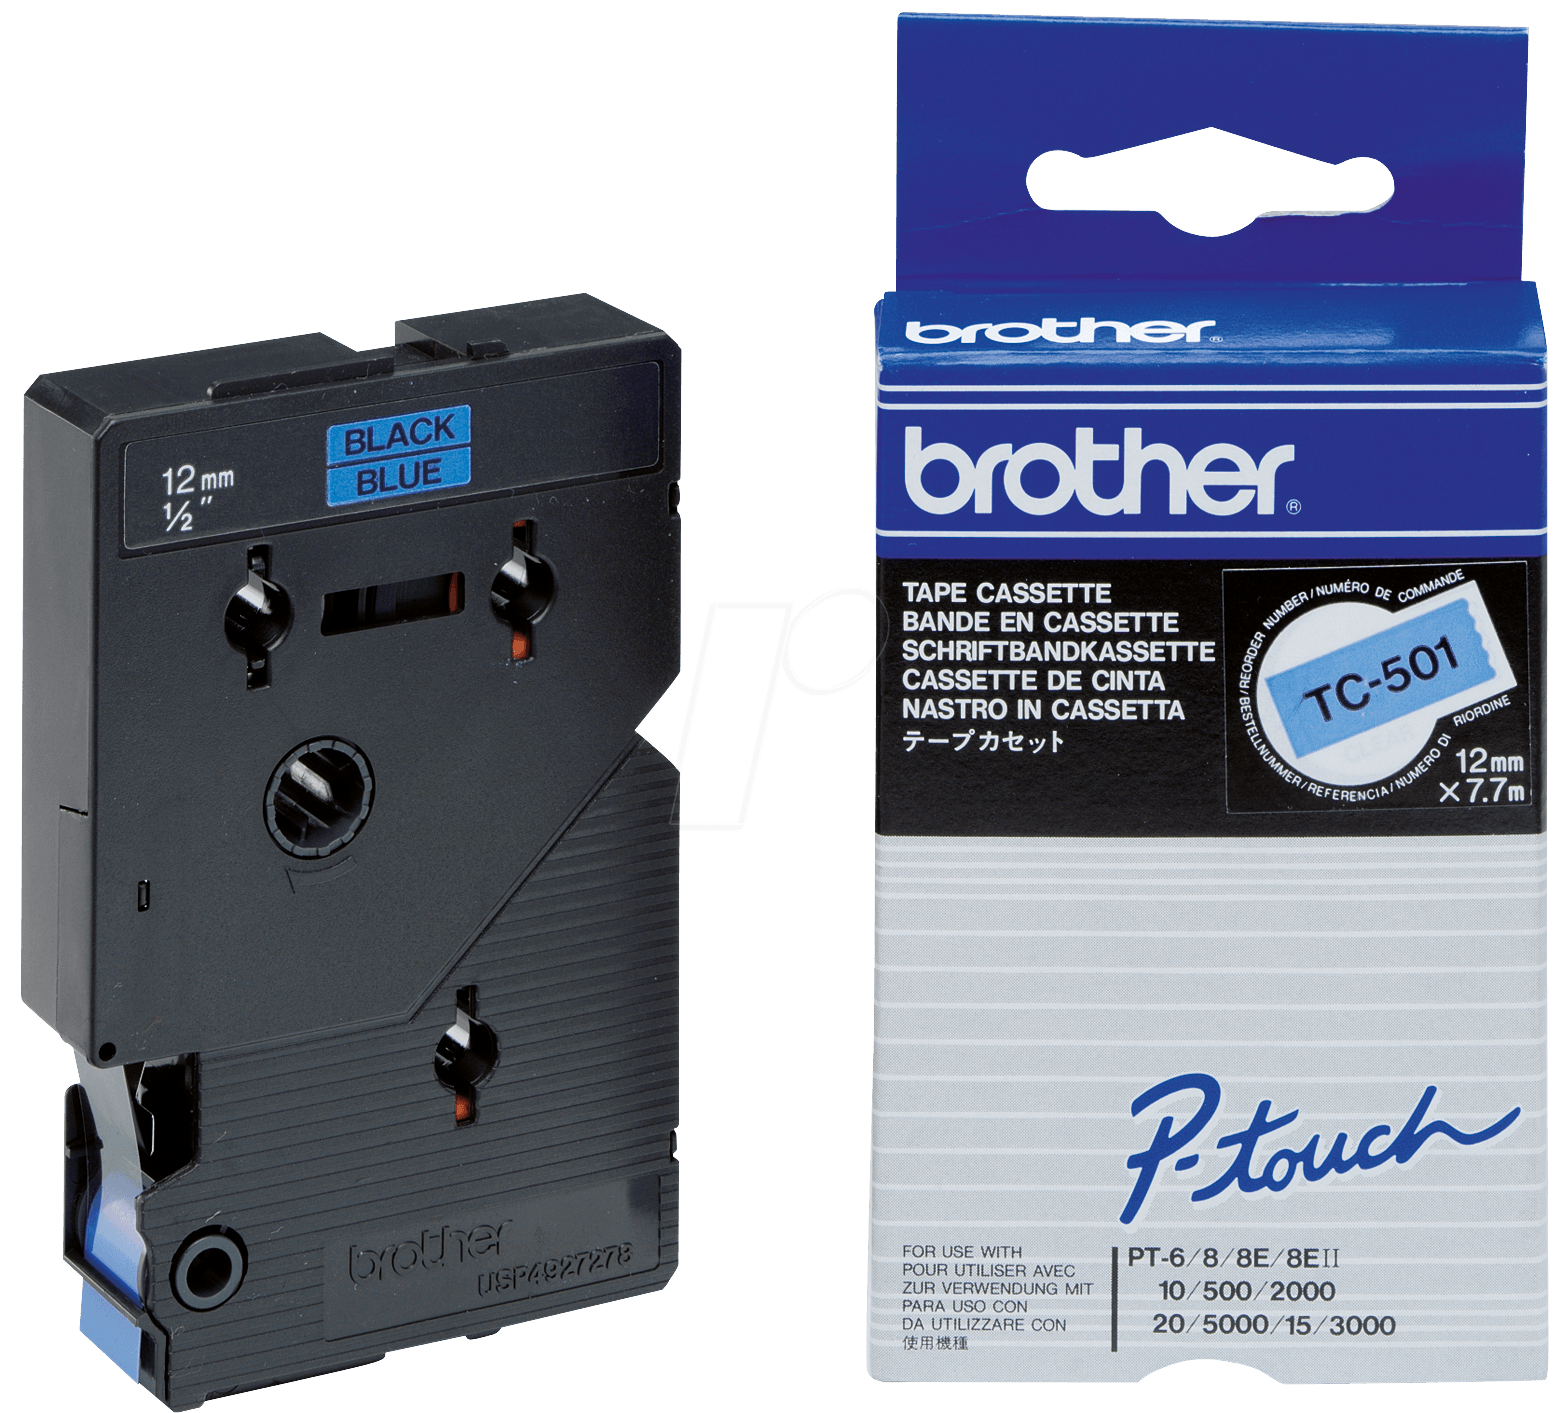 BROTHER TC501 P-TOUCH 12mm B-B